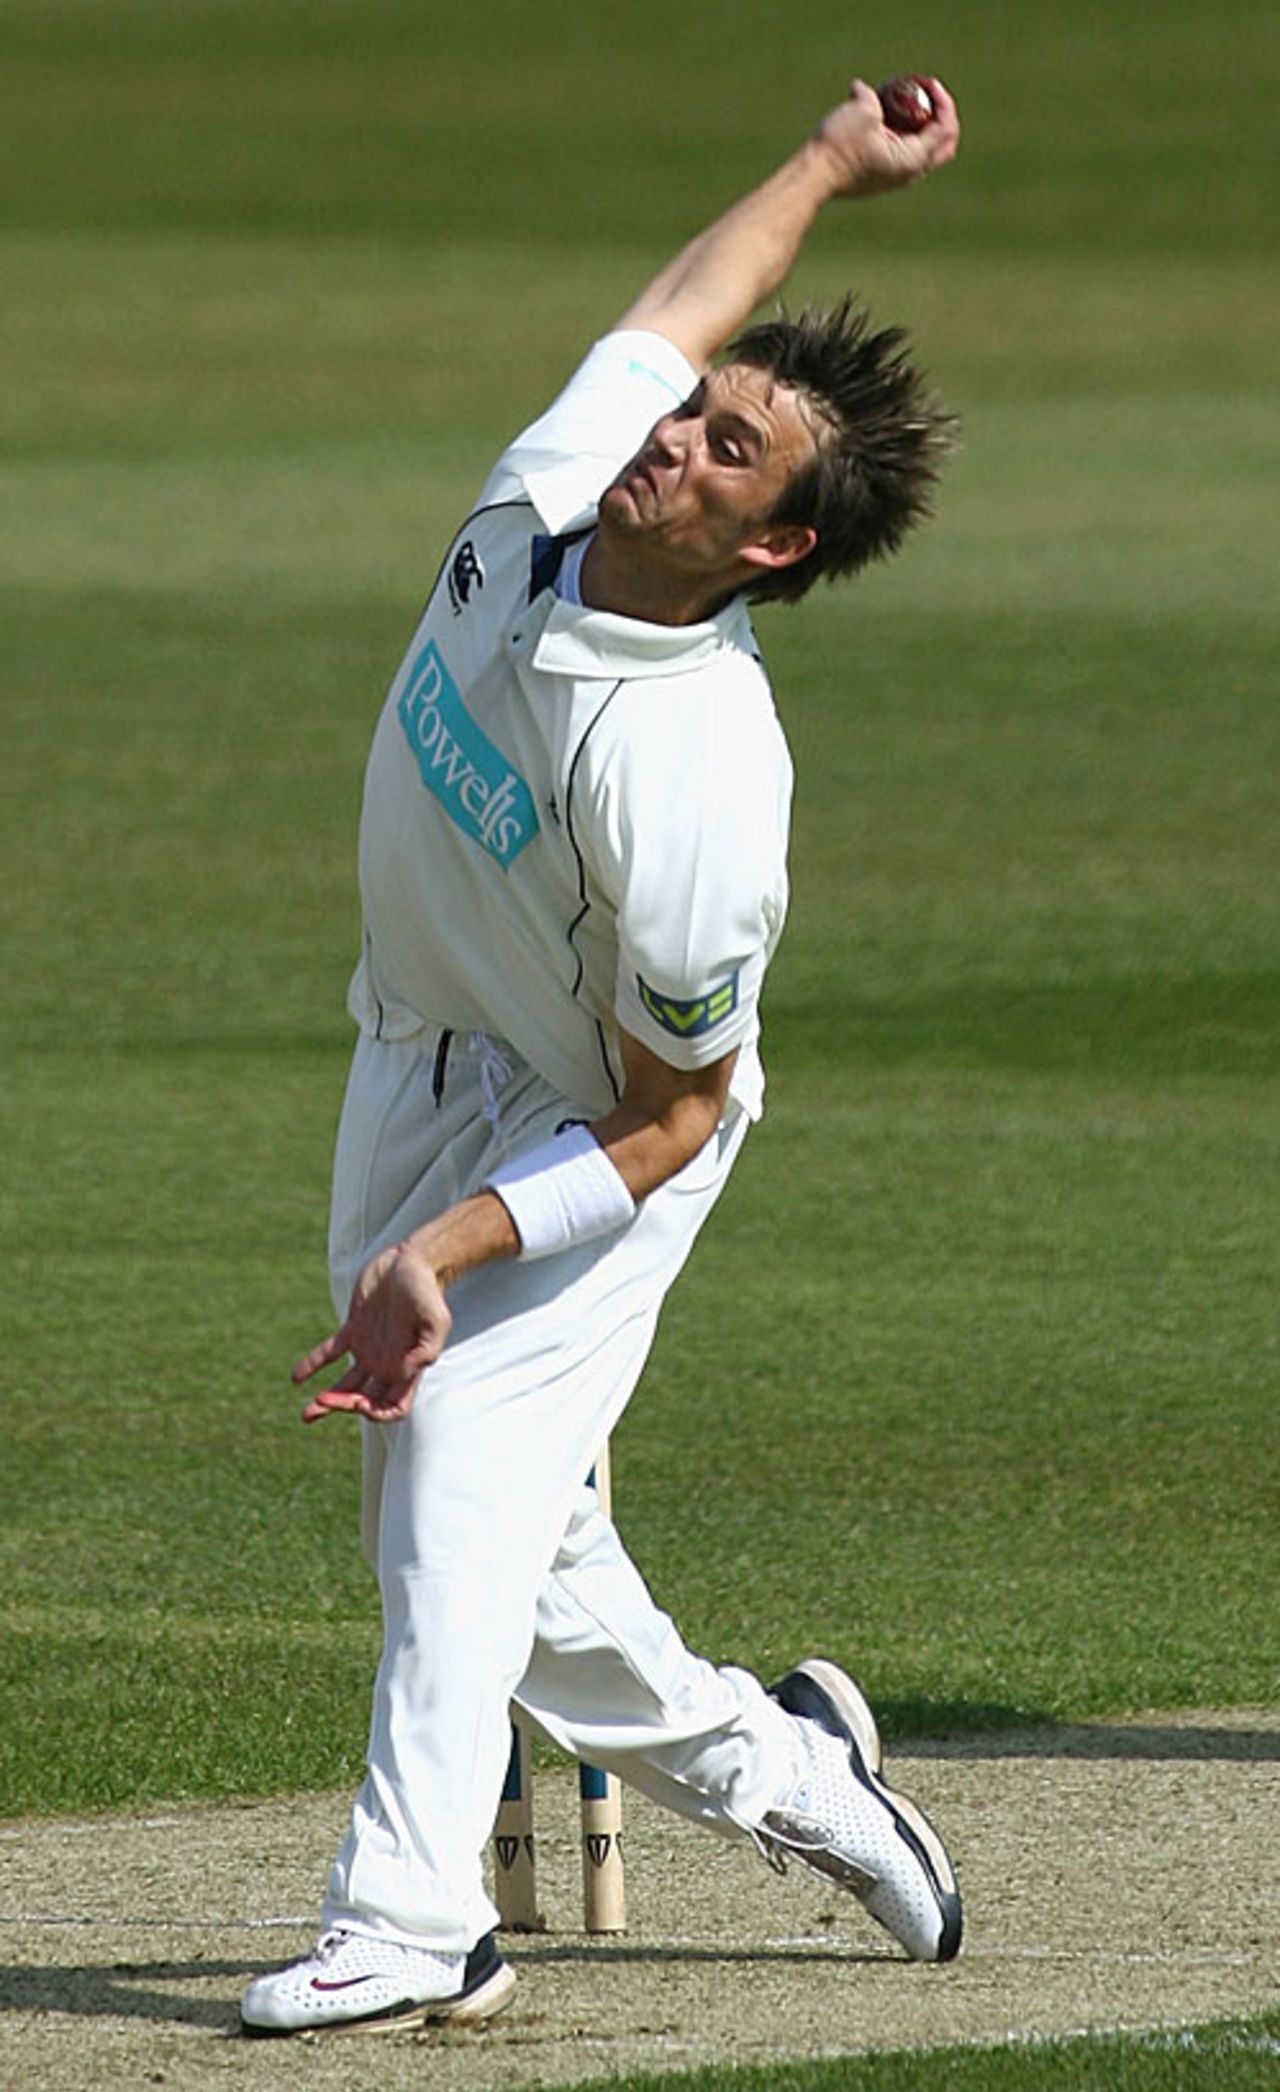 Shane Bond in his delivery stride for Hampshire, Hampshire v Sussex, Southampton, April 16, 2008